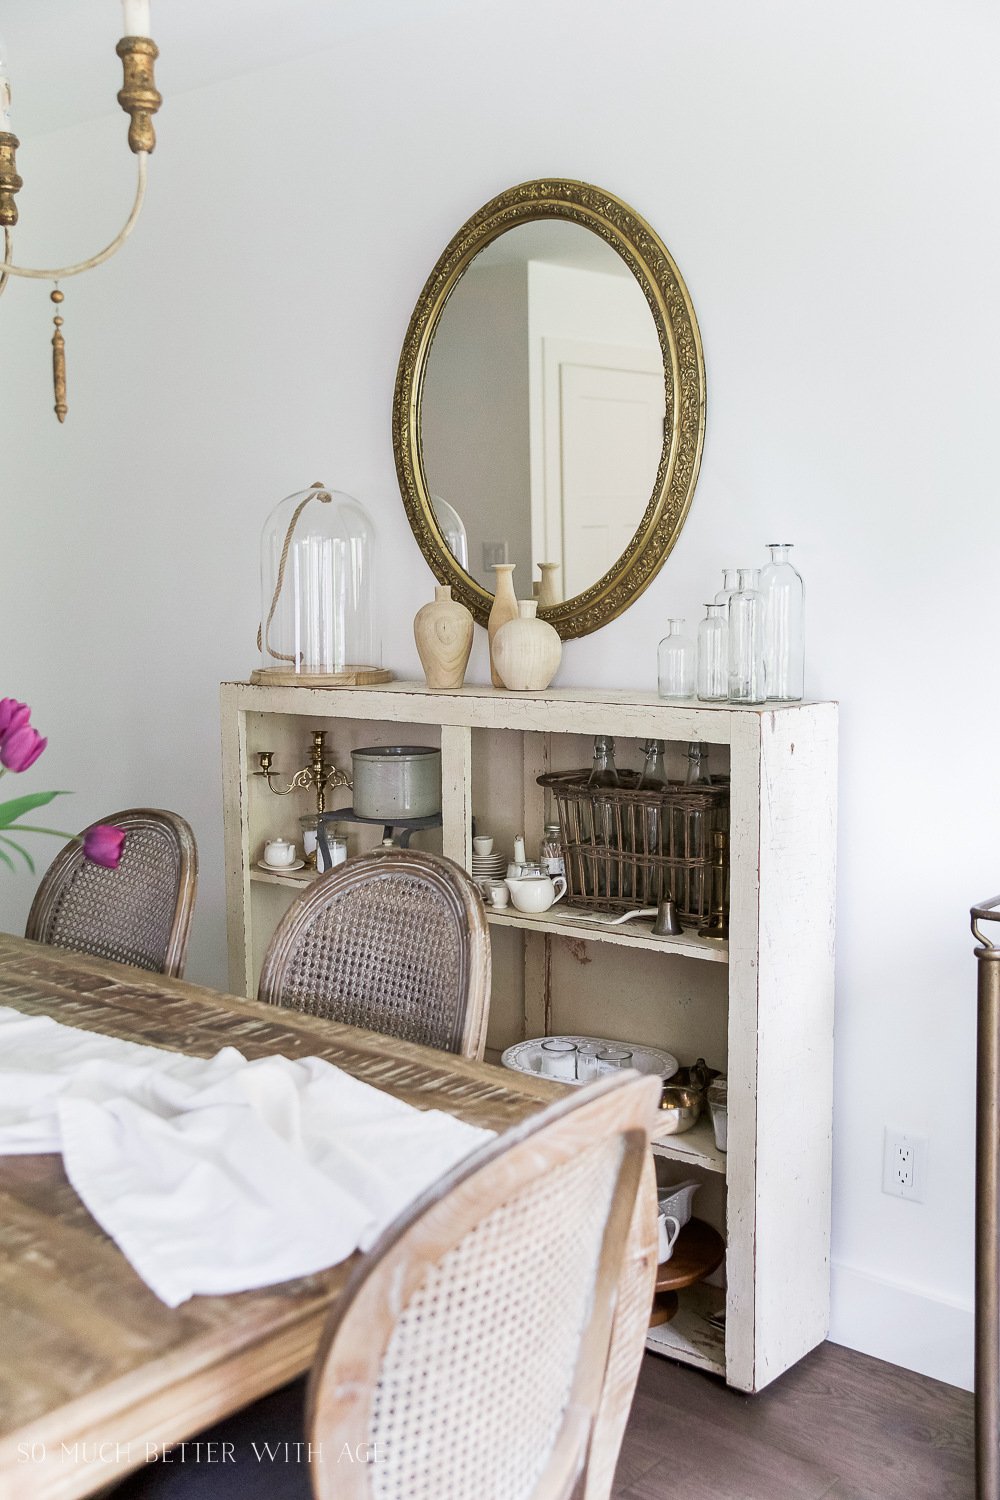 A distressed wooden shelf is behind the table and a round gold mirror is above the shelf.